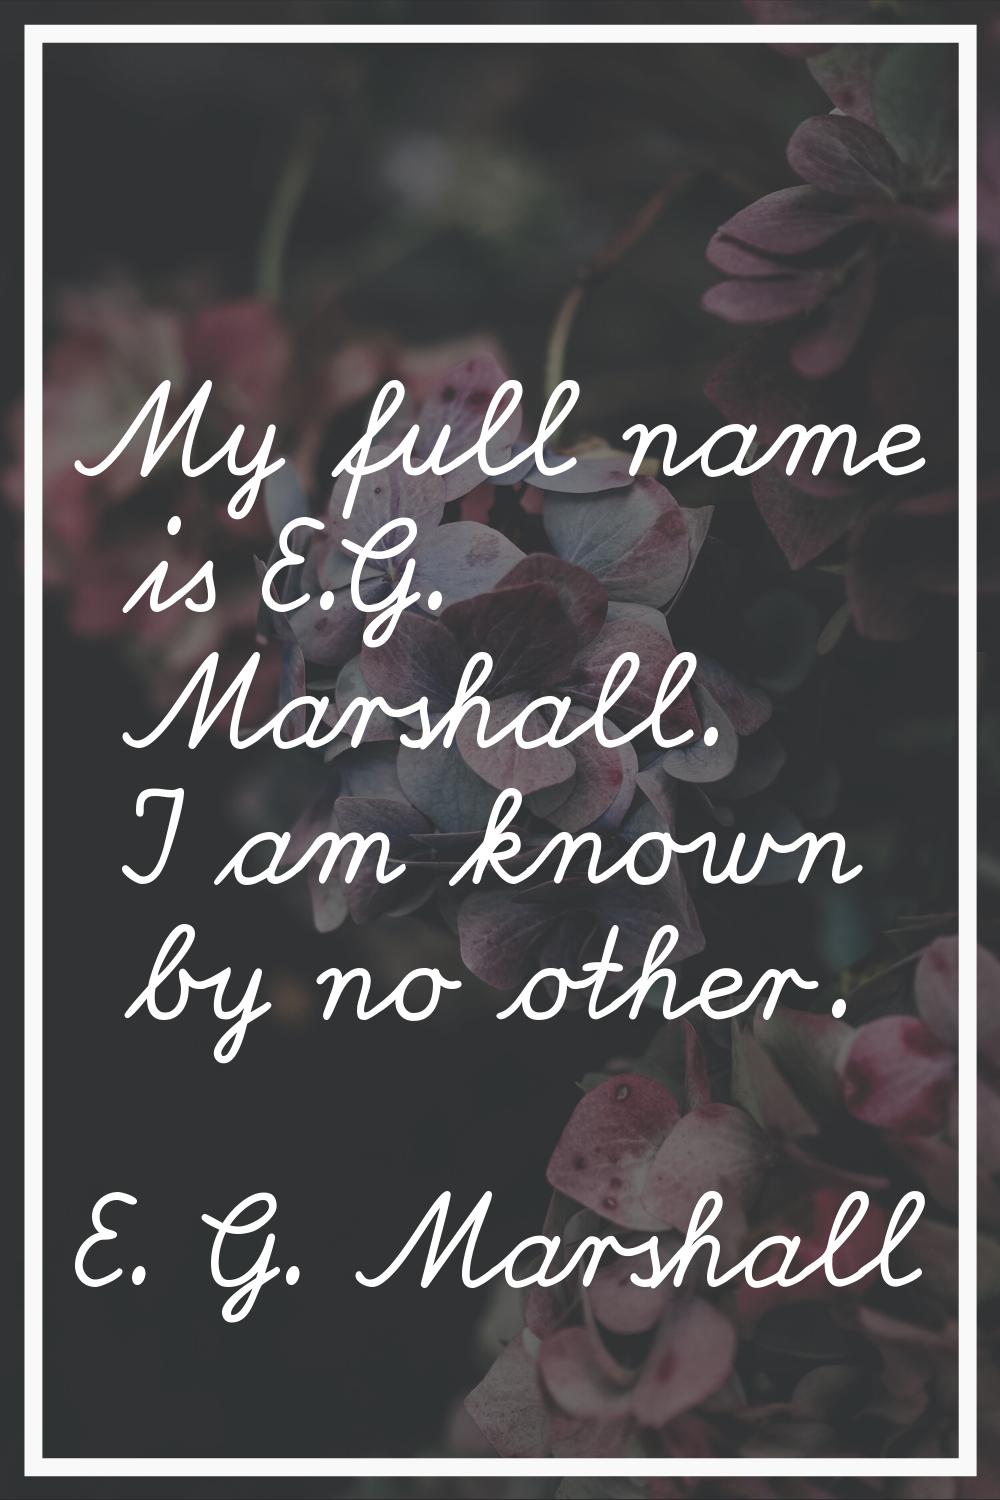 My full name is E.G. Marshall. I am known by no other.